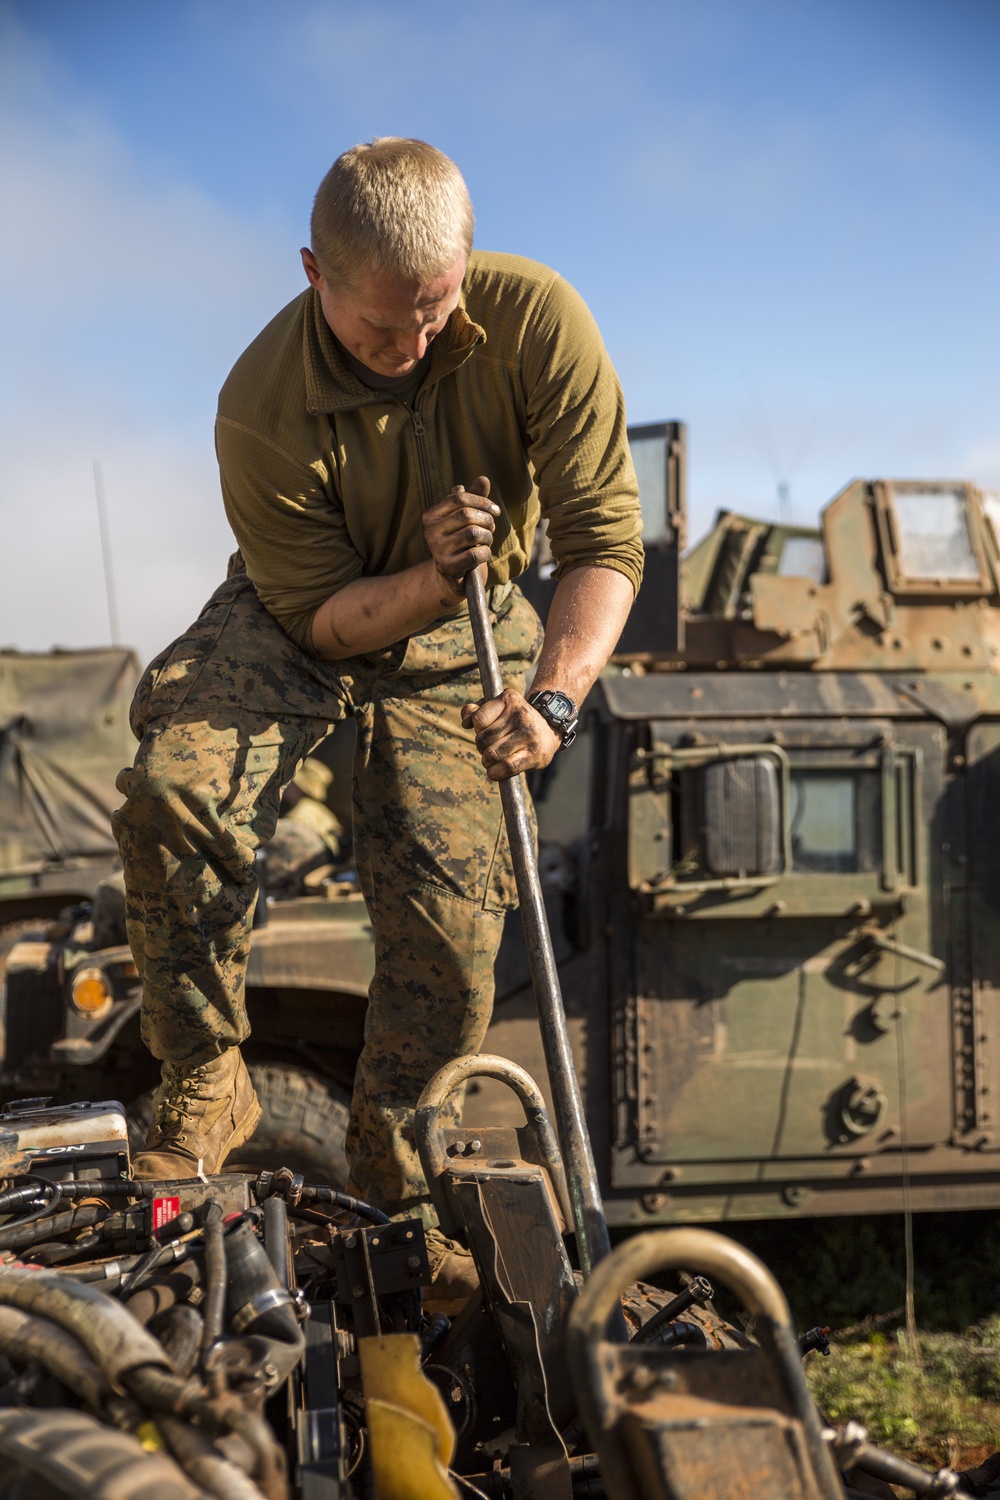 Marines turning wrenches, storming trenches